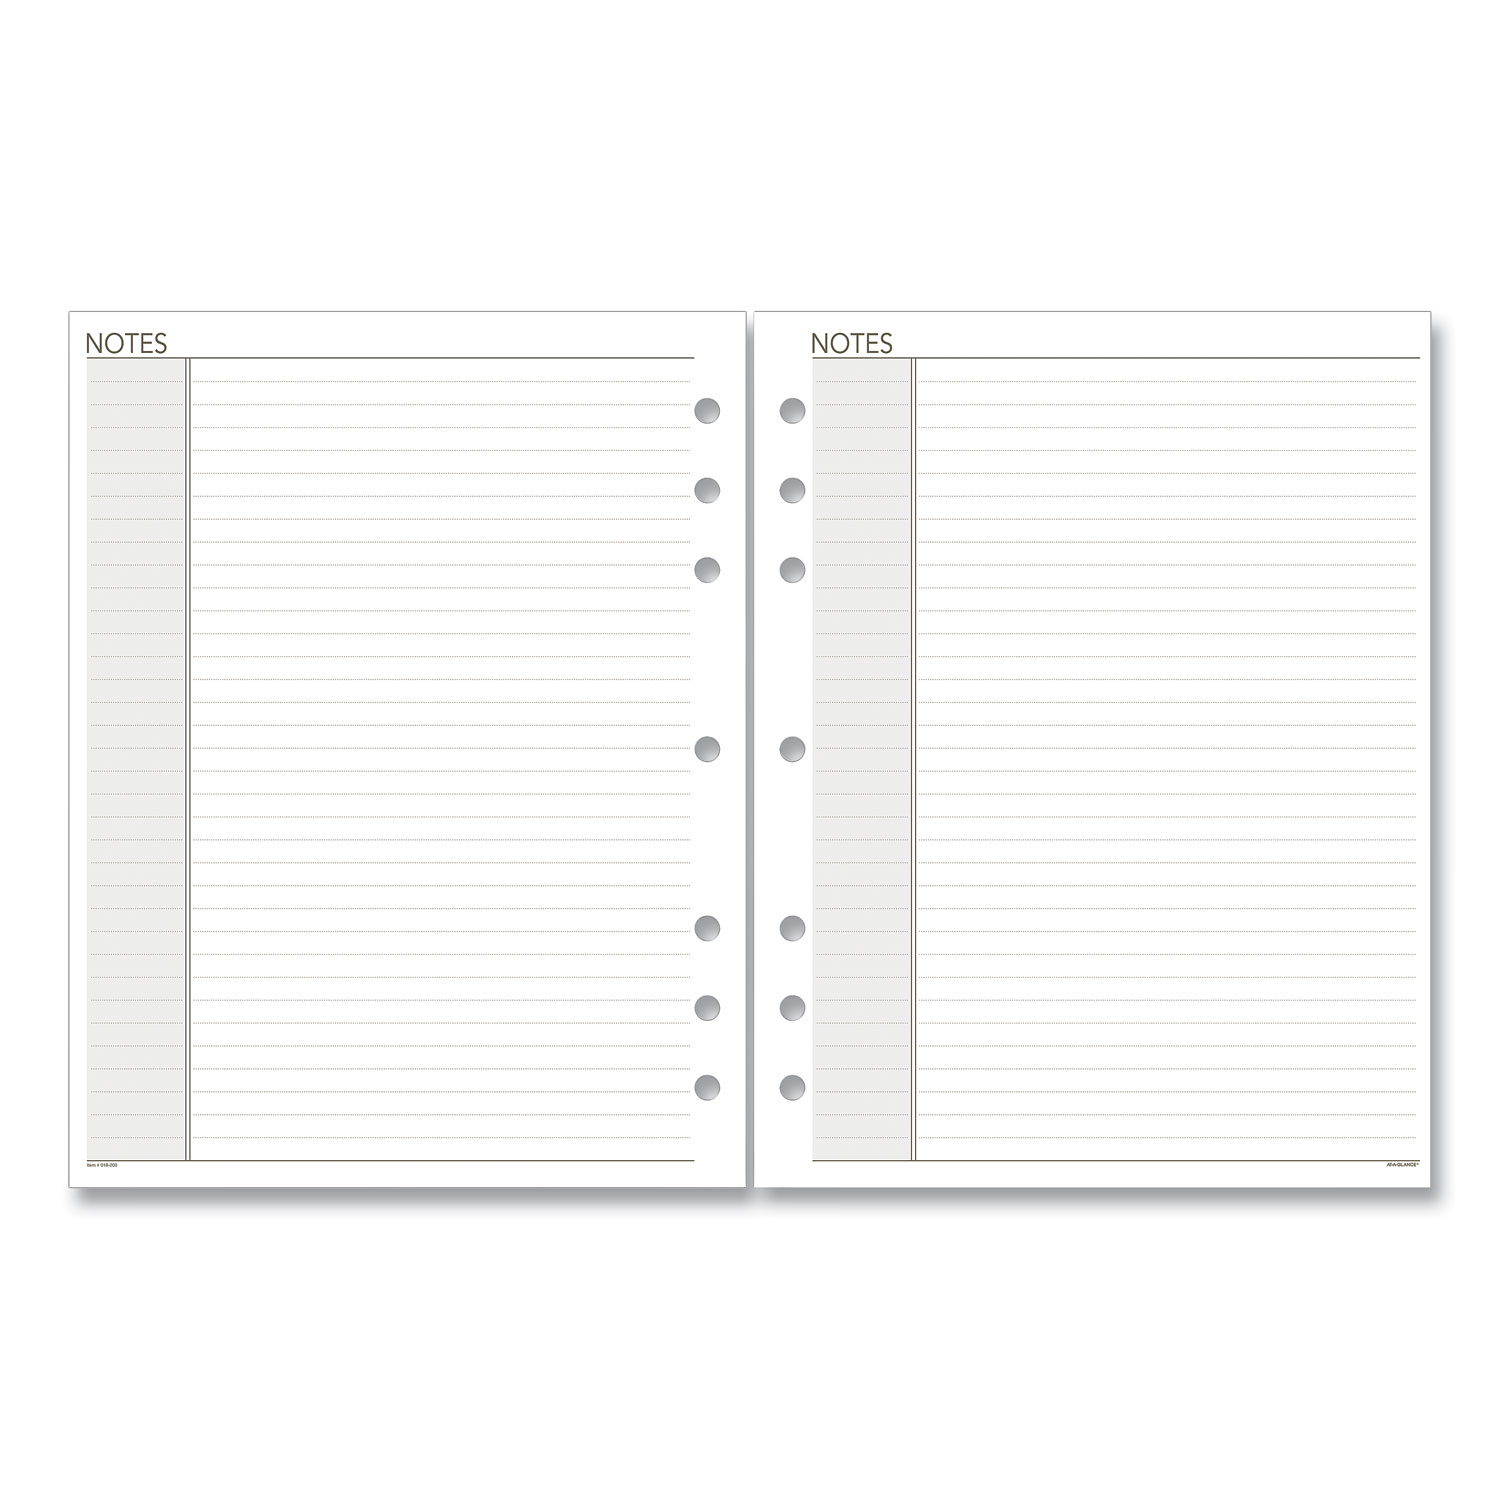 AT-A-GLANCE® Lined Notes Pages, 8.5 x 5.5, White, 30/Pack